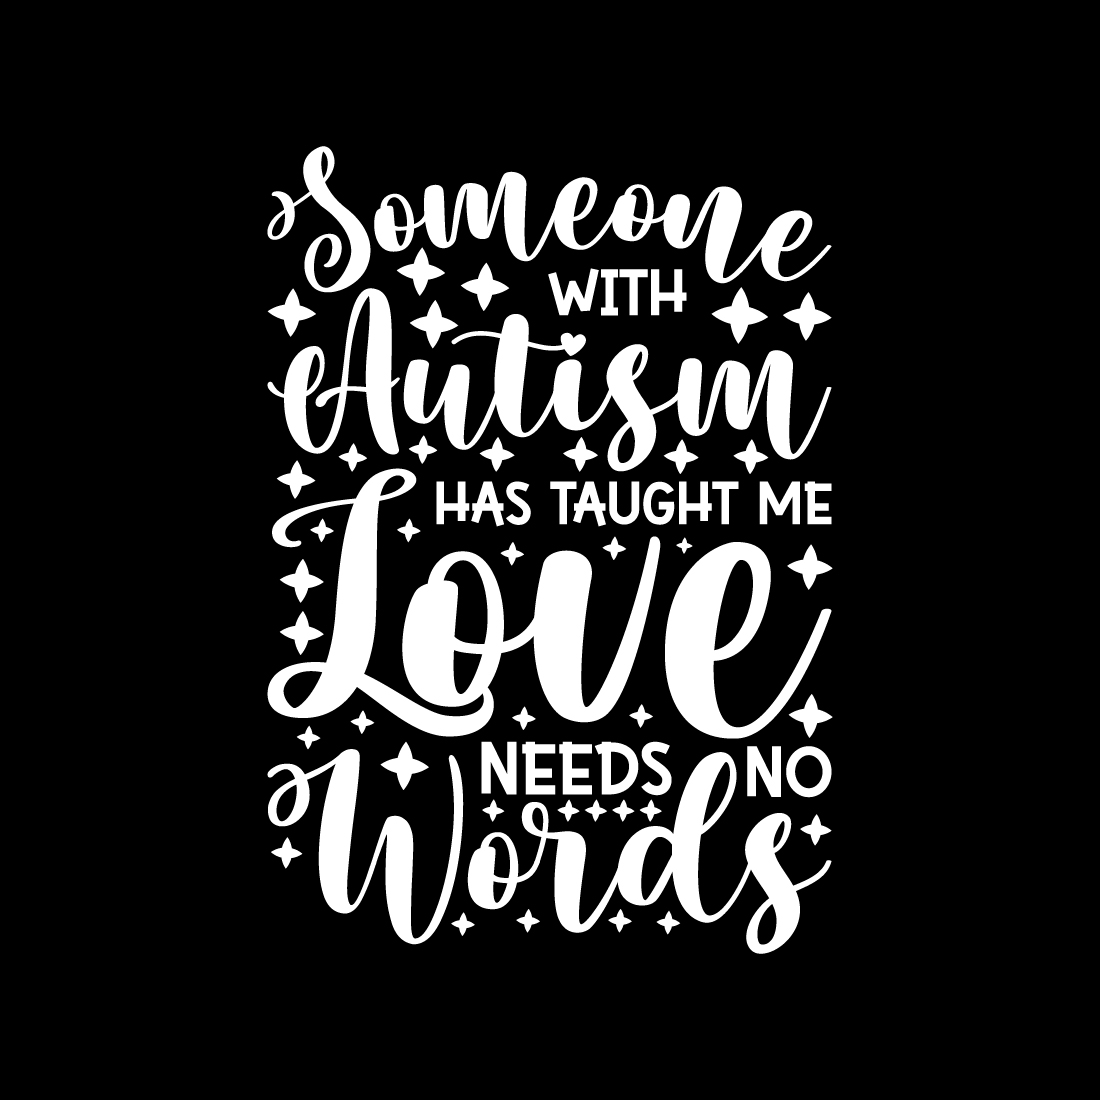 Someone with autism has taught me love needs no words.